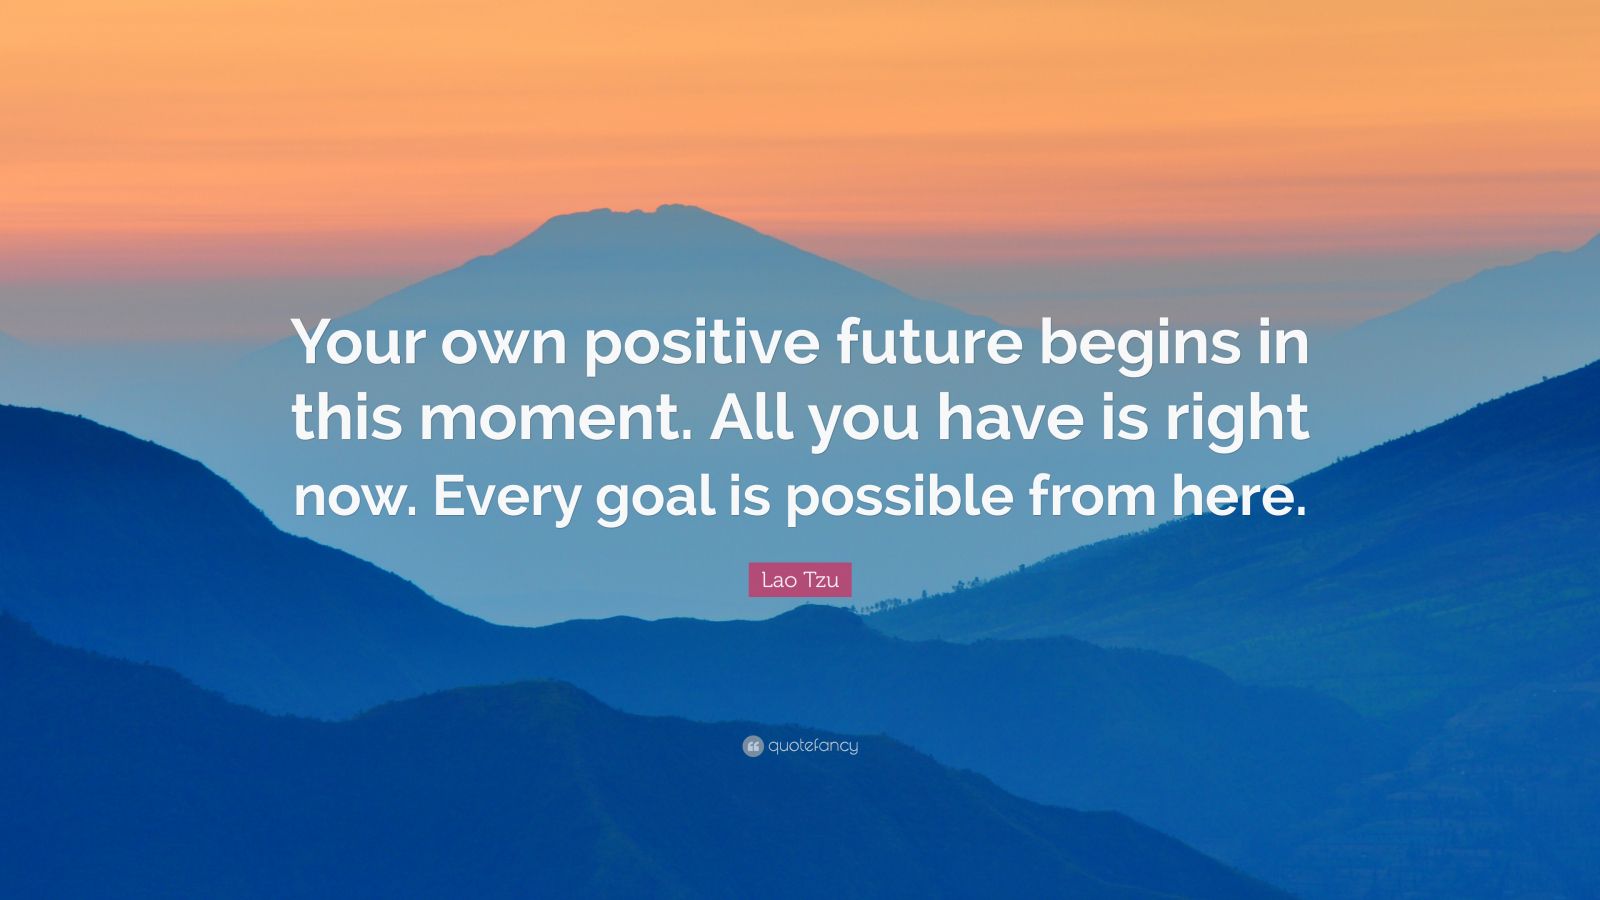 Lao Tzu Quote: “Your own positive future begins in this moment. All you